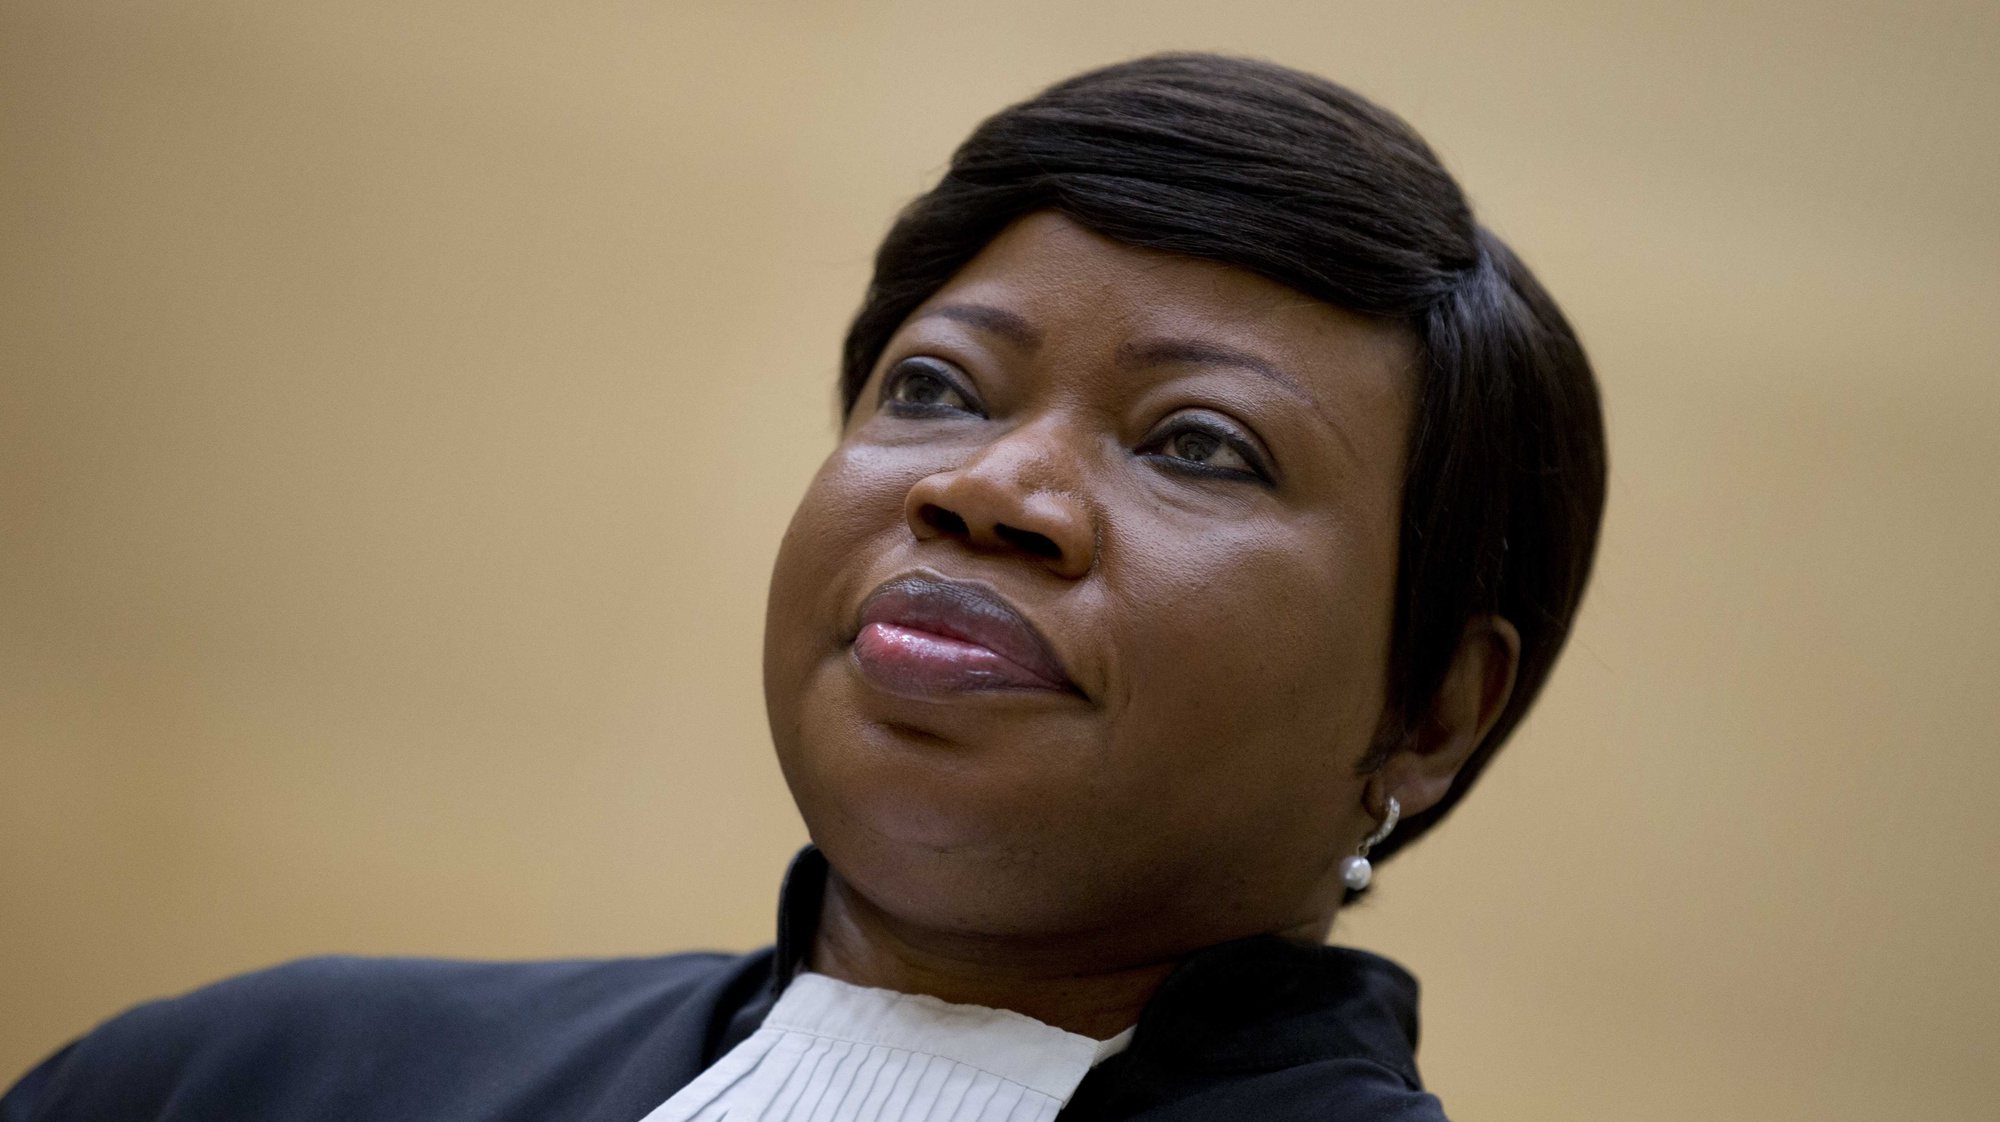 epa07486346 (FILE) -  Prosecutor Fatou Bensouda waits for former Congo Vice President Jean-Pierre Bemba to enter the court room of the International Criminal Court (ICC) to stand trial with Aime Kilolo Musamba, Jean-Jacques Mangenda Kabongo, Fidele Babala Wandu and Narcisse Arido, in The Hague, Netherlands, 29 September 2015, reissued 05 April 2019. Media reports on 05 April 2019 state that the US has revoked the visa of Fatou Bensouda, the international criminal court’s chief prosecutor, her office has said, over a possible investigation into US soldiers actions in Afghanistan.  EPA/PETER DEJONG / POOL *** Local Caption *** 52273662